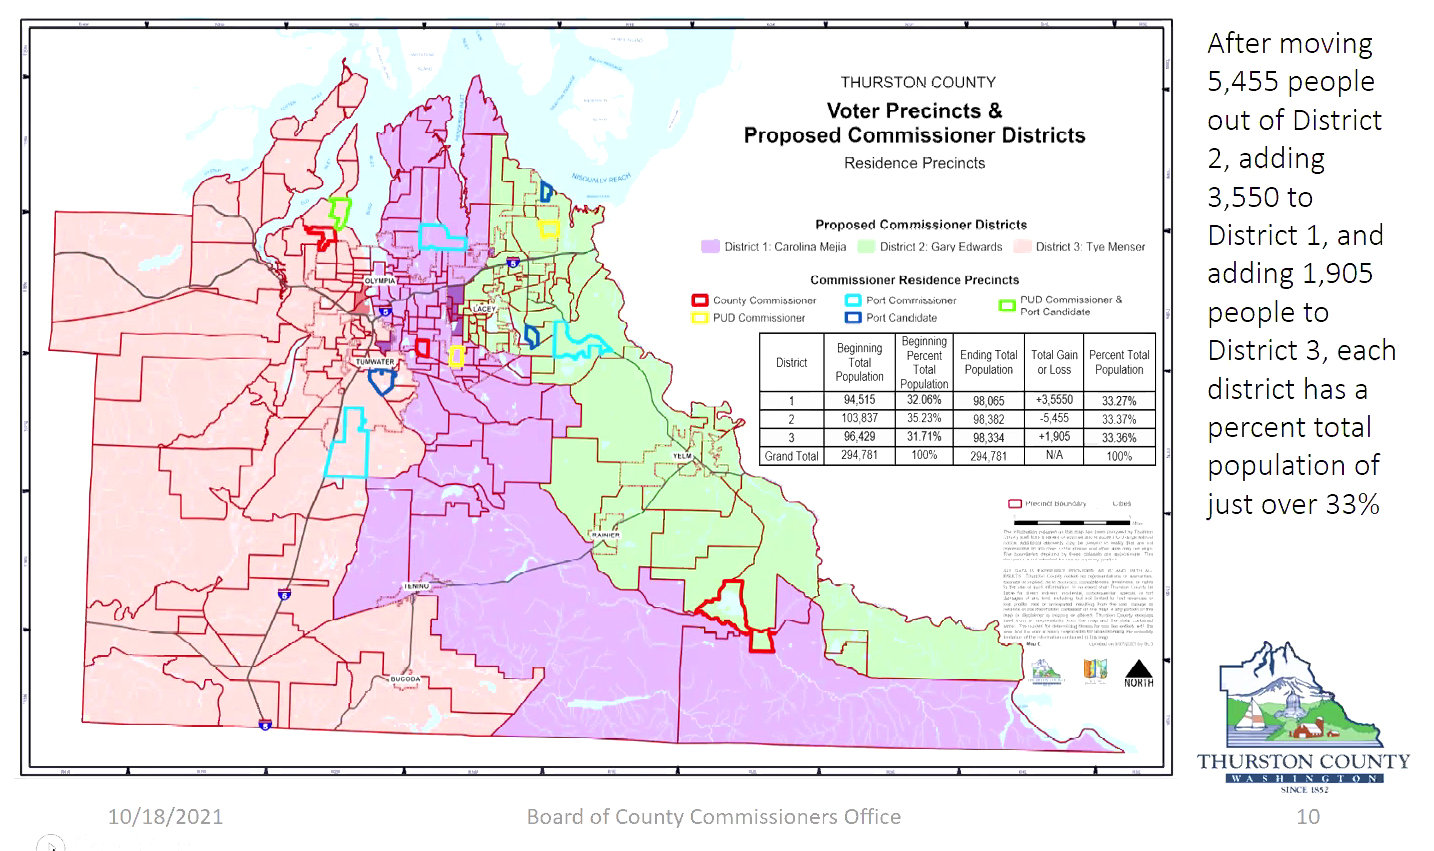 This map, presented to the Port of Olympia commissioners on Oct. 18, 2021, shows a county staff proposal to move parts of District 2 into the other two geographic districts for county and port commission districts. The purple area covers District 1, the green area covers District 2, and the pink area covers District 3.